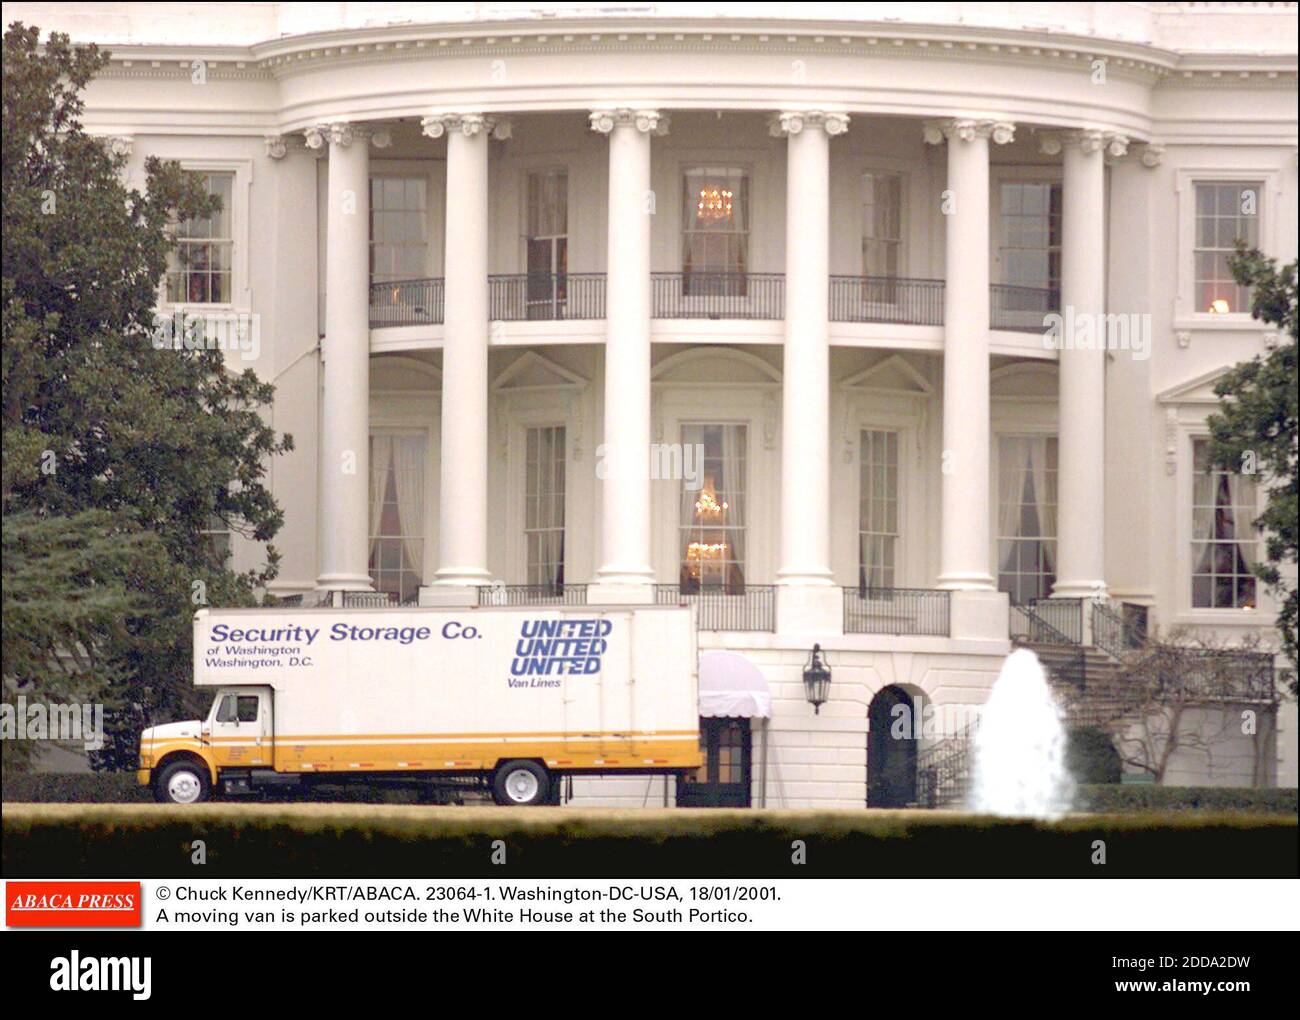 NO FILM, NO VIDEO, NO TV, NO DOCUMENTARY - © Chuck Kennedy/KRT/ABACA. 23064-1. Washington-DC-USA, 18/01/2001. A moving van is parked outside the White House at the South Portico. Stock Photo